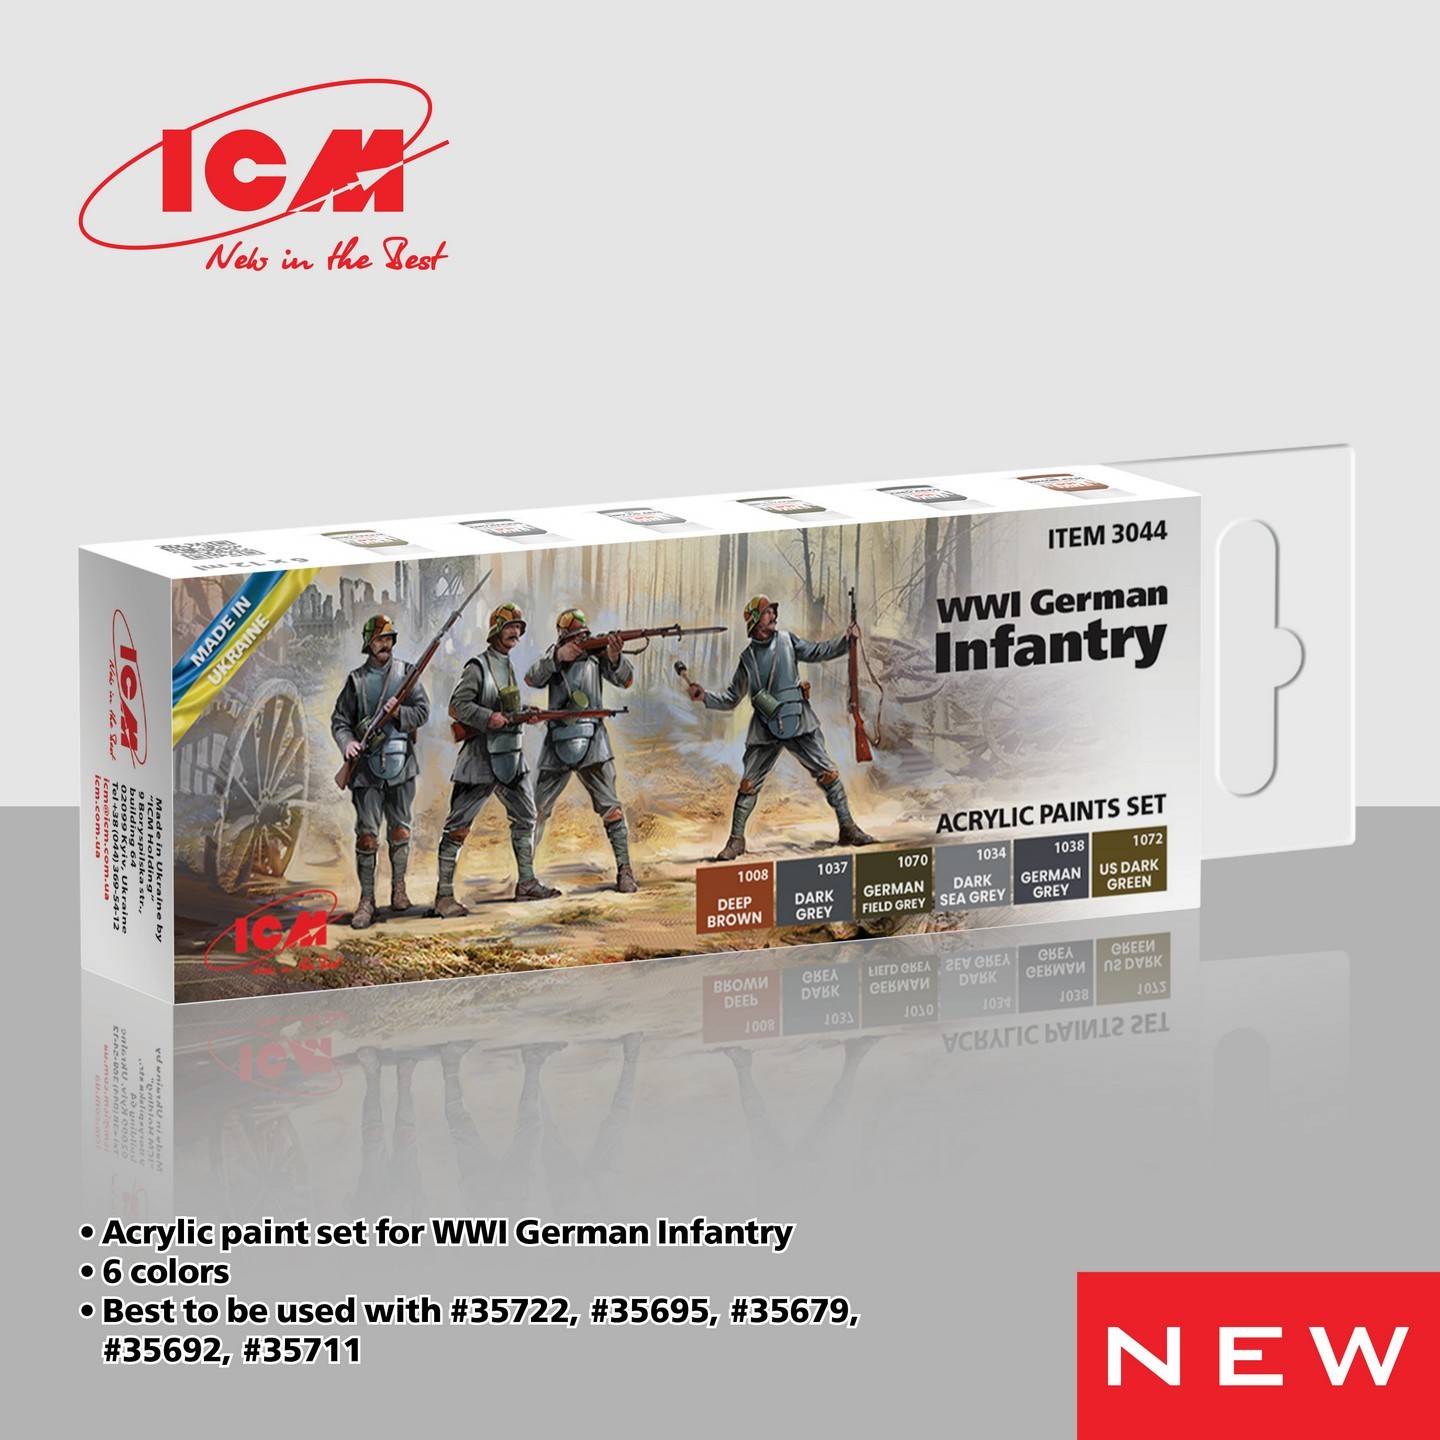 Acrylic paint set for WWI German infantry